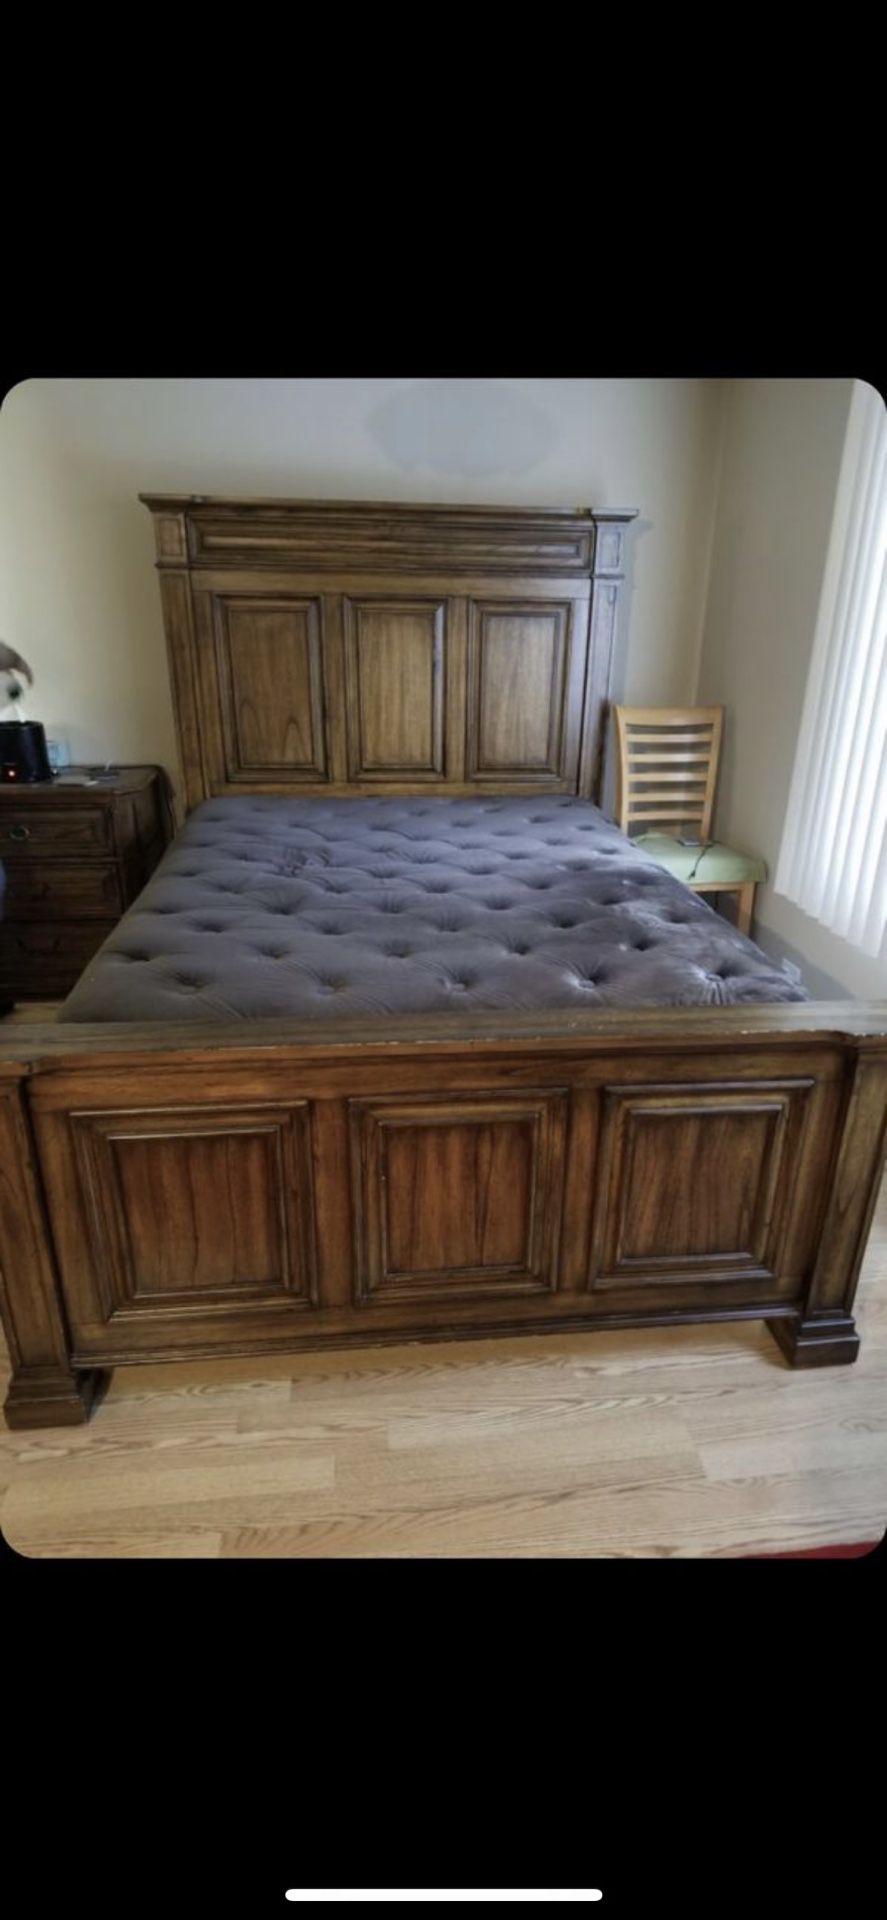 Bedroom Set, All Furniture in Pictures. No Mattress/BoxSpring.